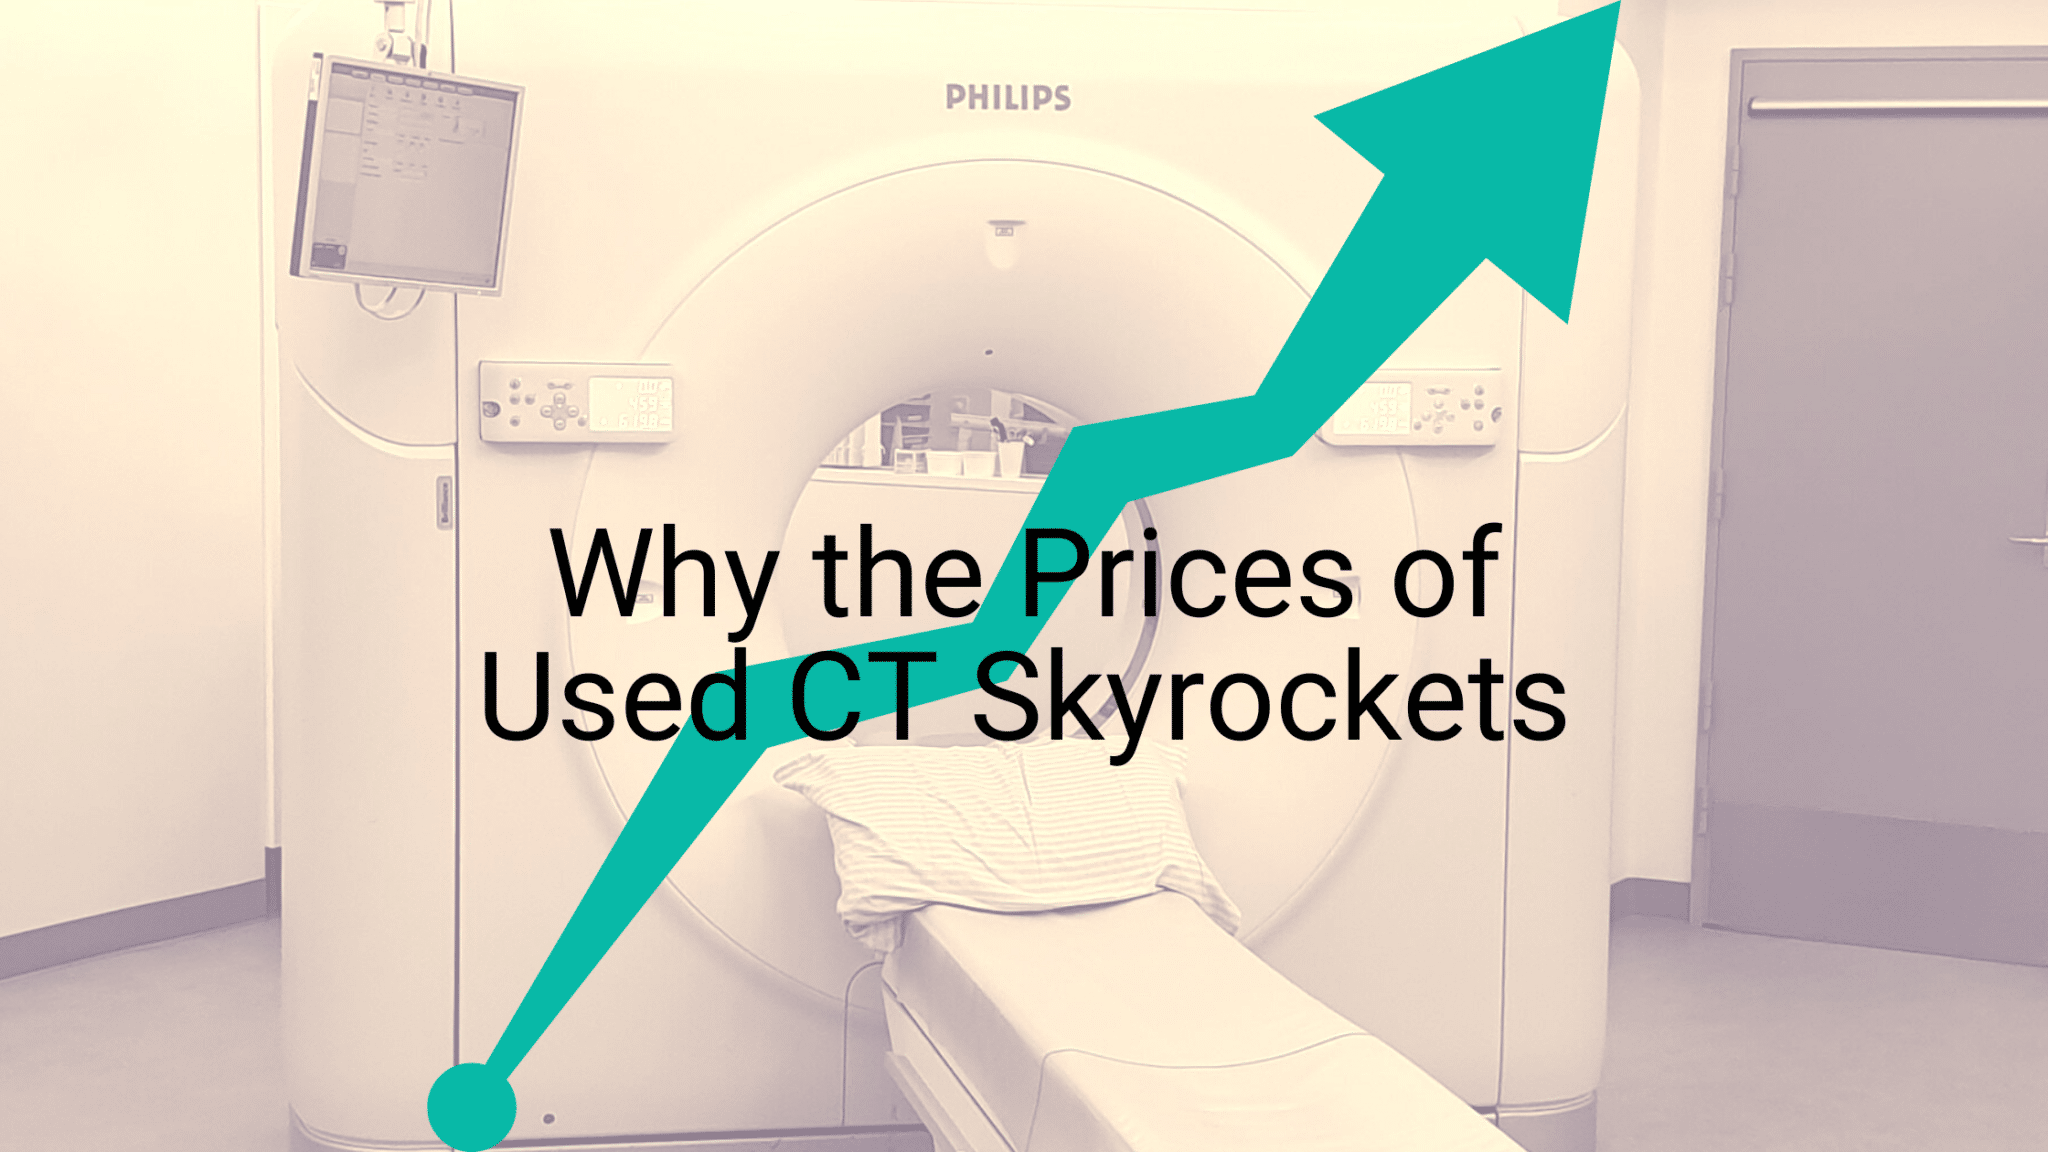 Why the Prices of Used CT Skyrockets. And what to look out for